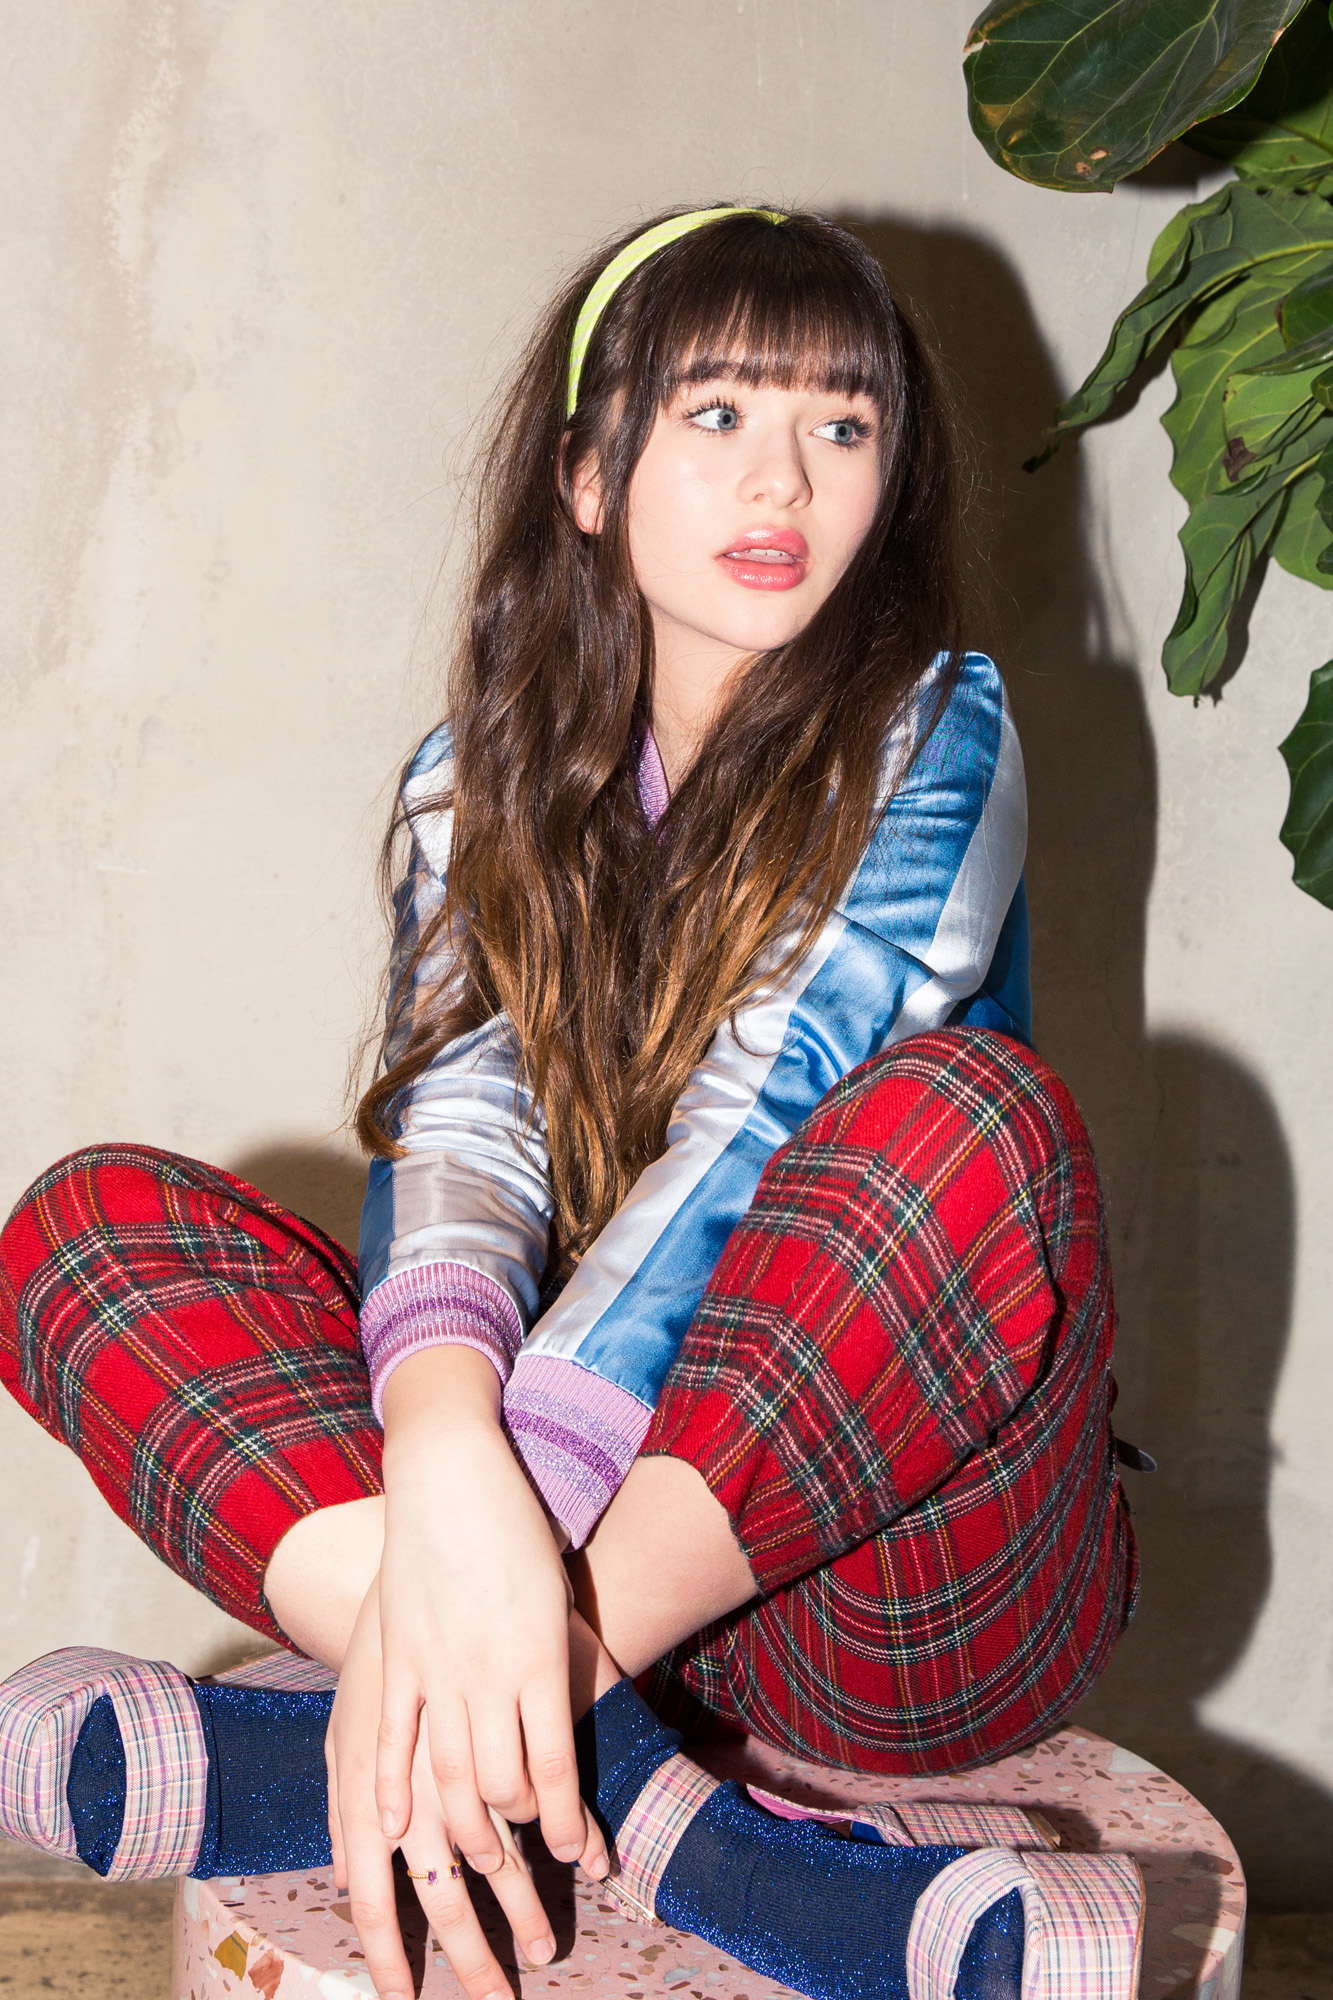 A Series of Unfortunate Events' Malina Weissman on Acting and Fashion